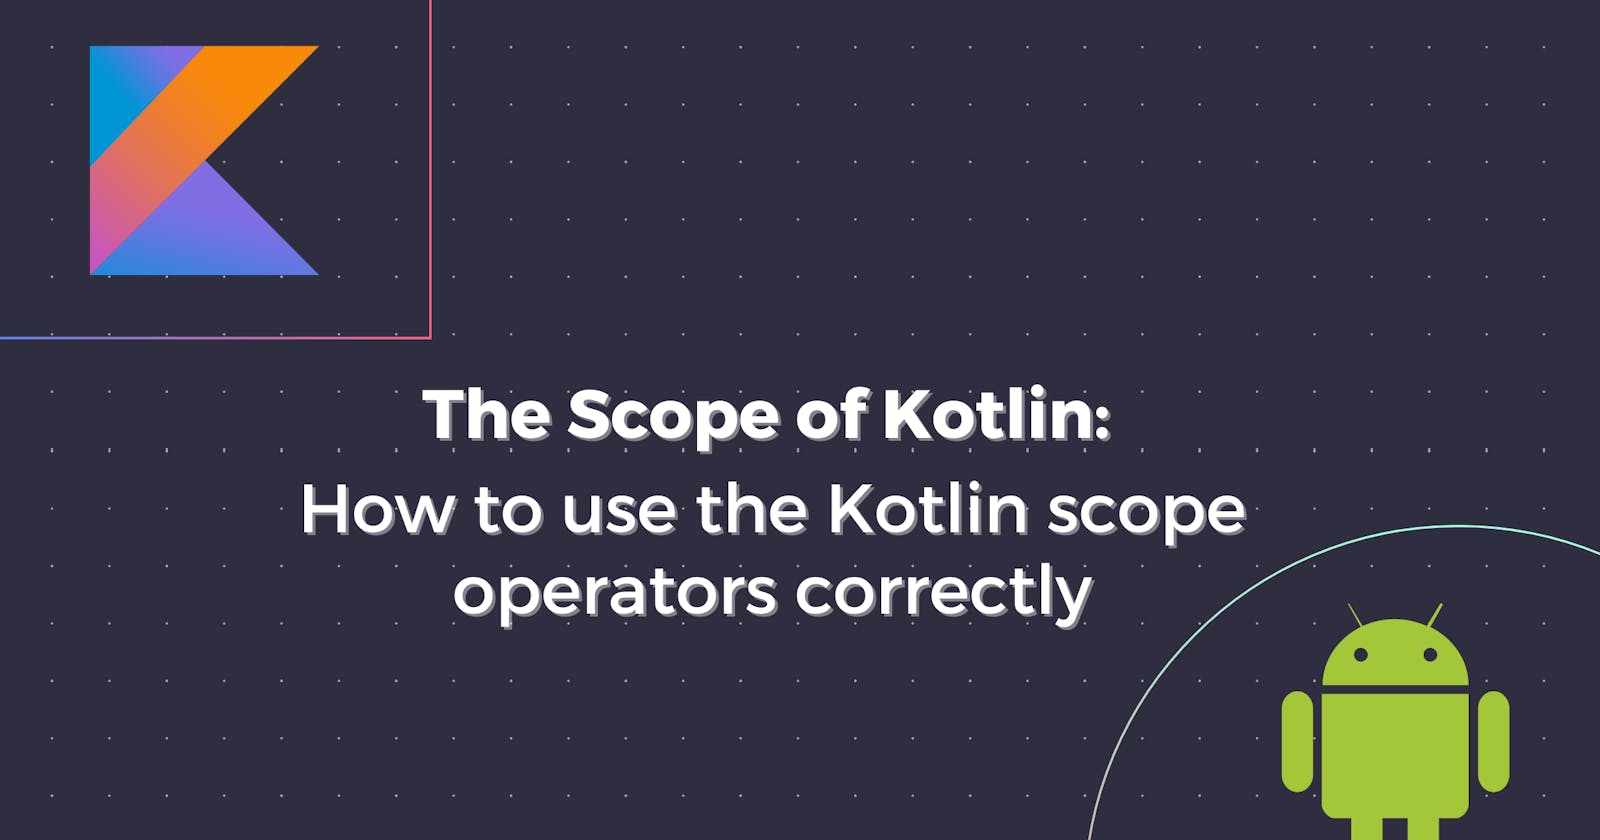 The Scope of Kotlin: How to use the Kotlin scope operators correctly